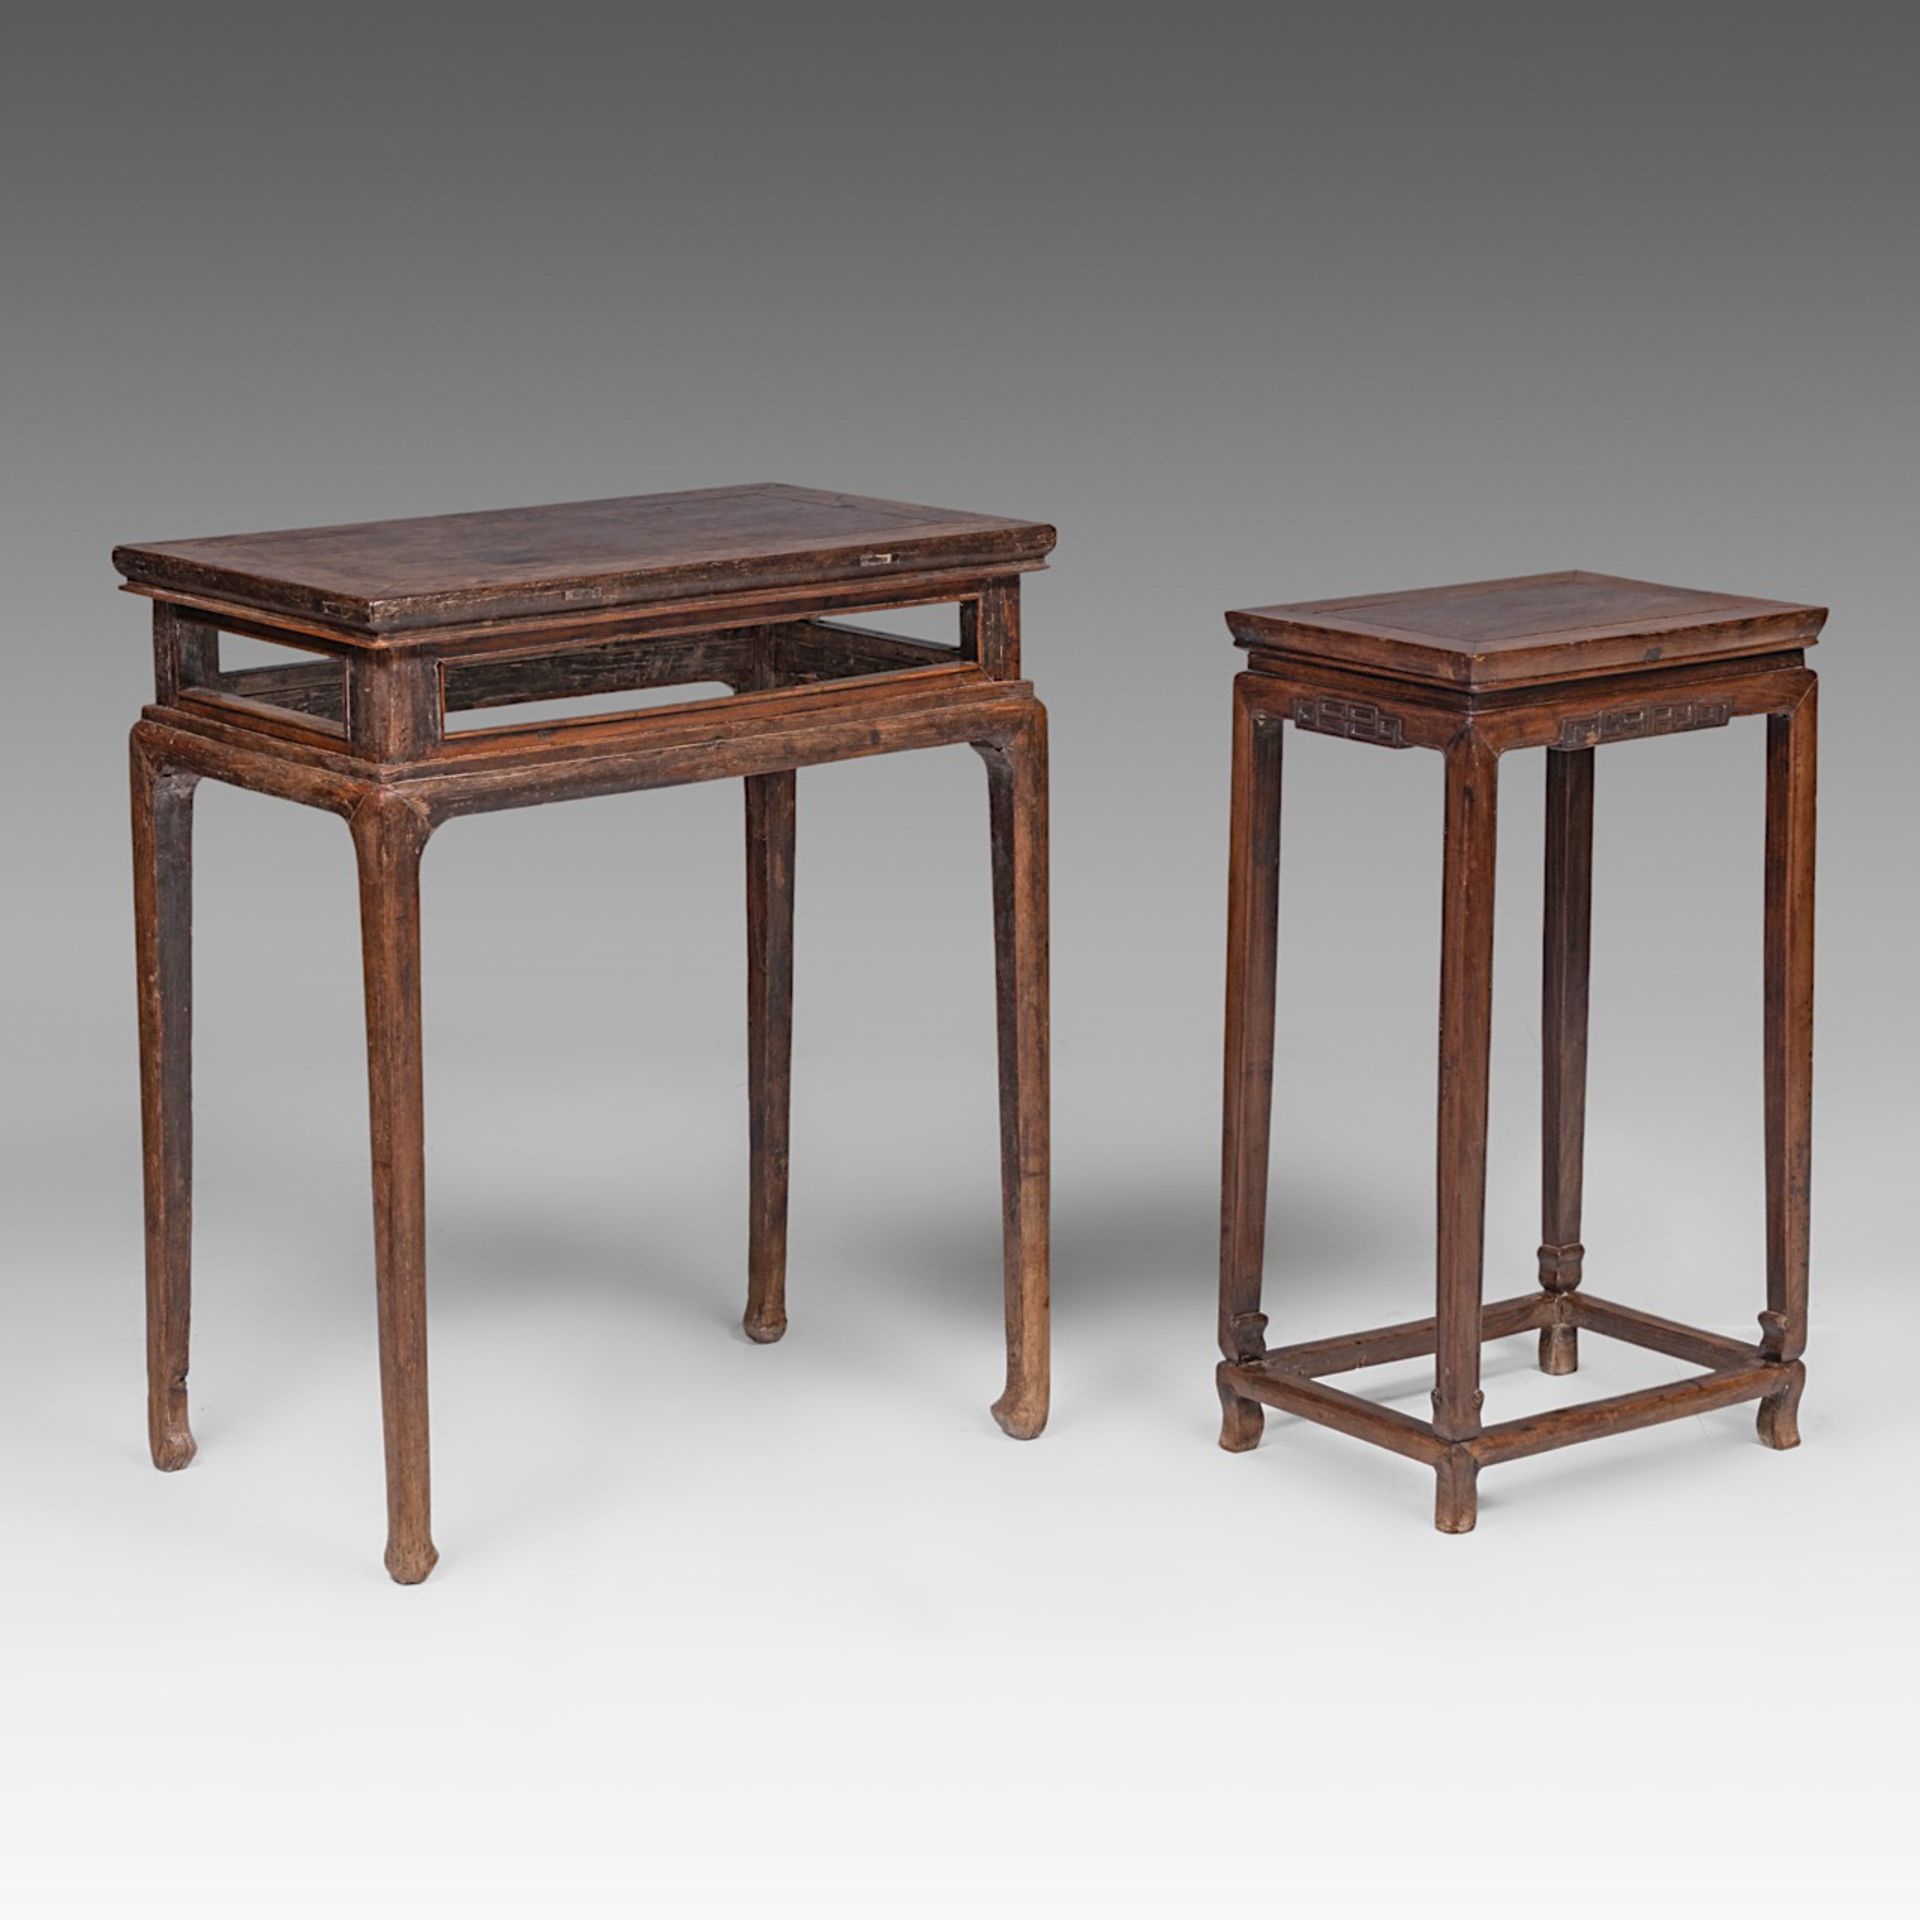 Two Chinese hardwood side tables, mid - late Qing dynasty, largest H 82 - 69 x 42 cm